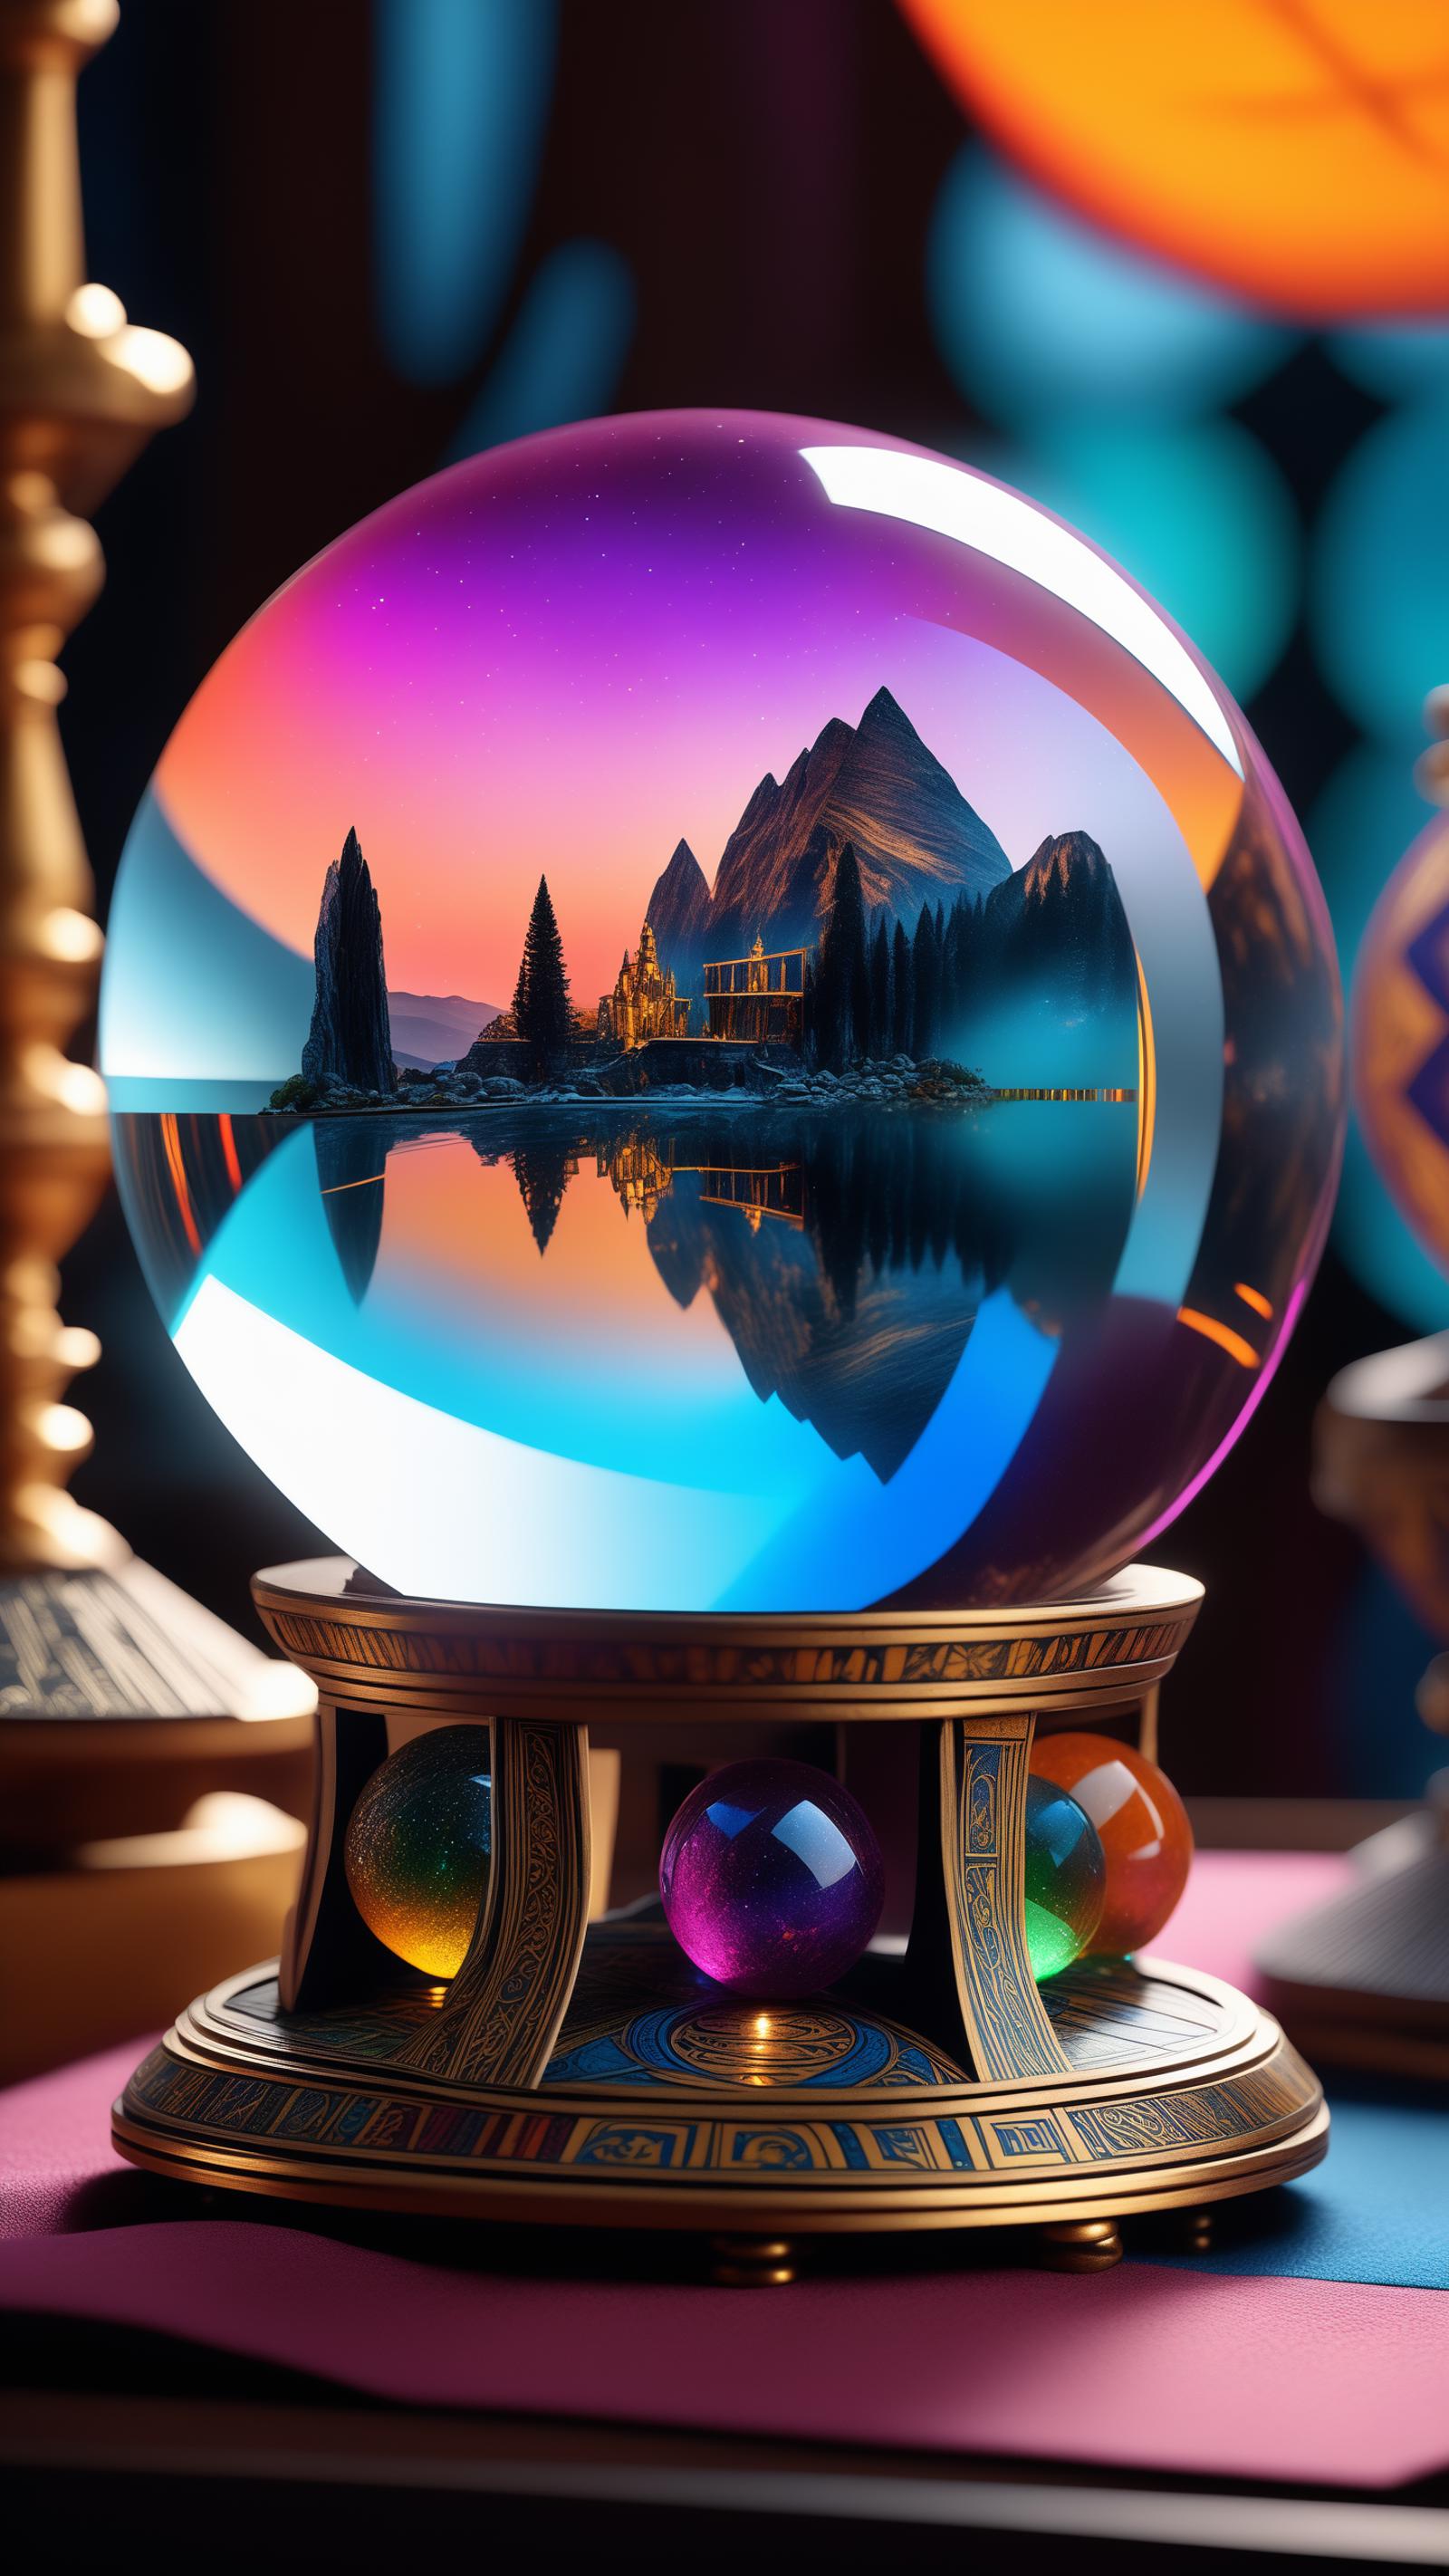 A purple and blue globe with a mountain village scene reflected in the water.